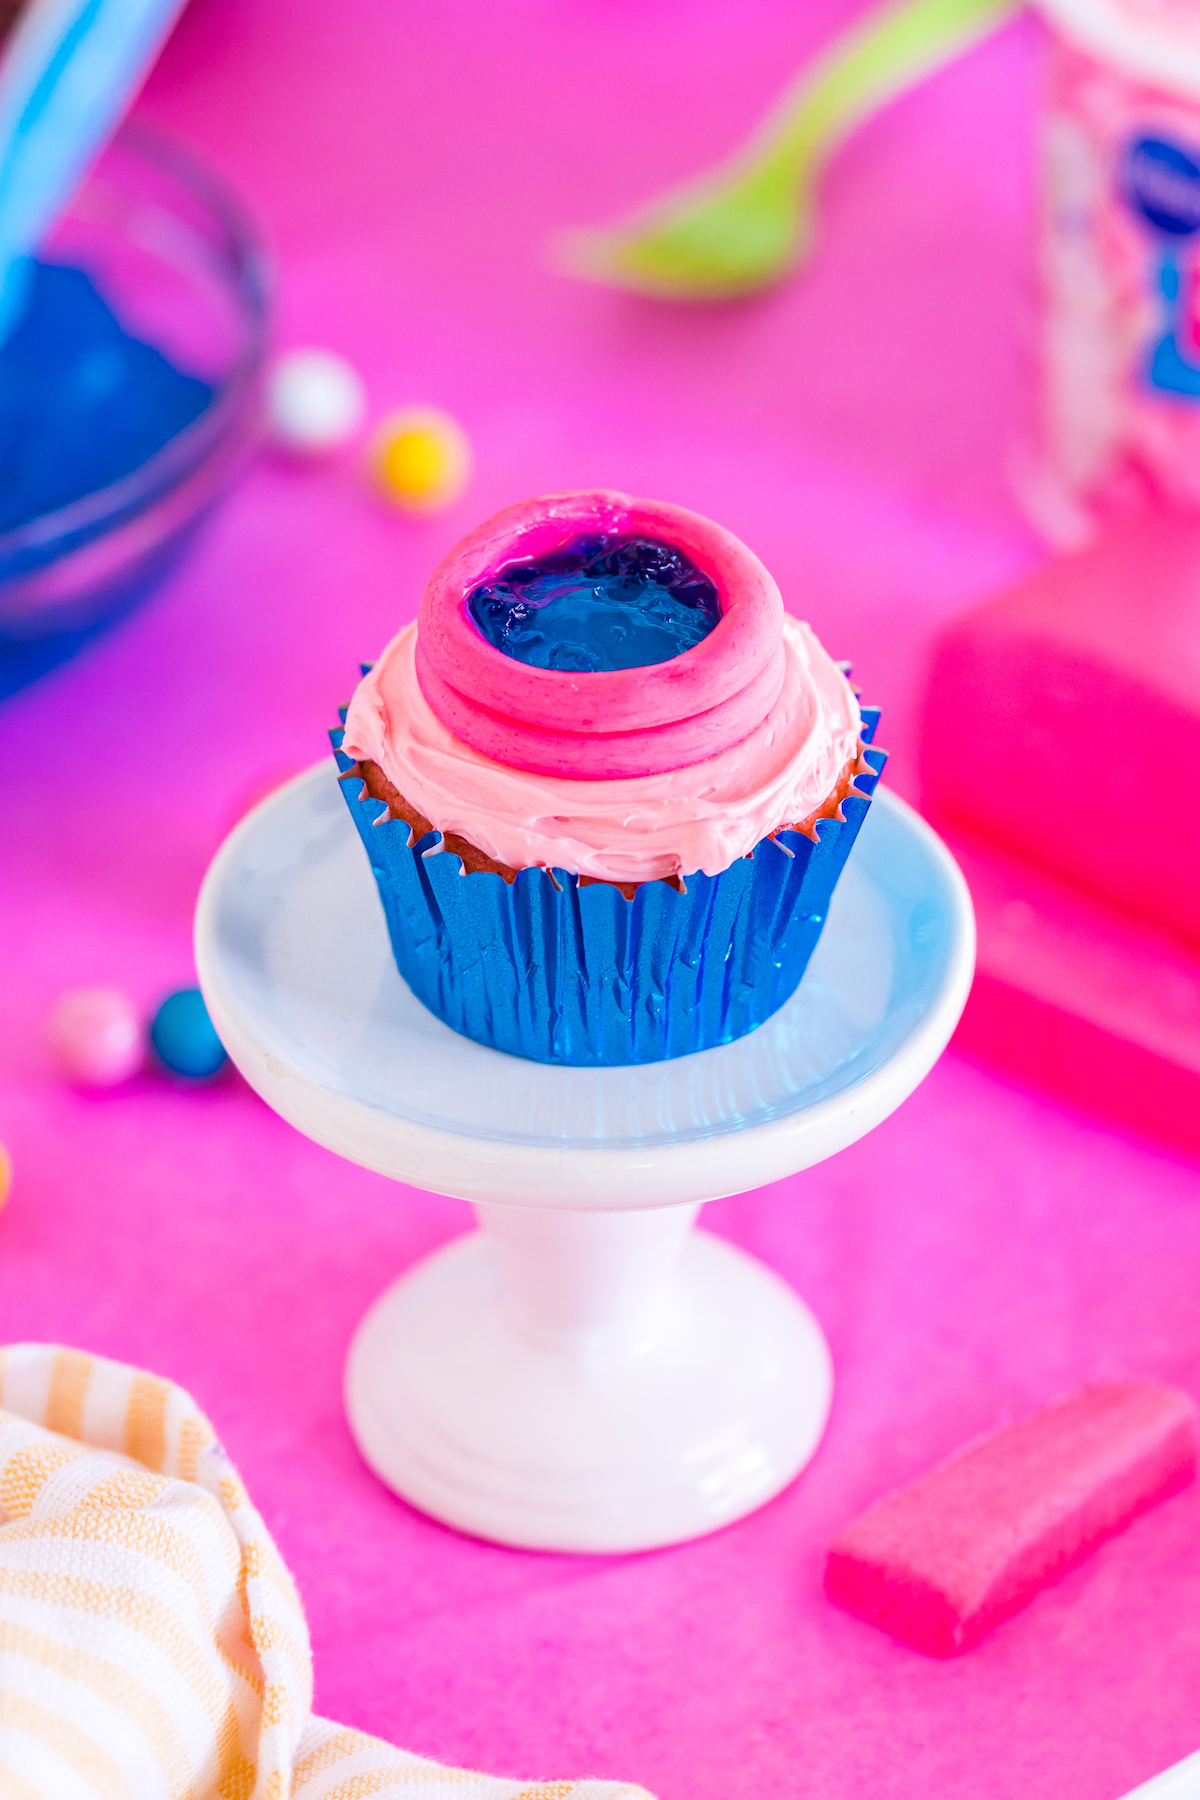 blue gelatin used to make mini pools for cupcakes